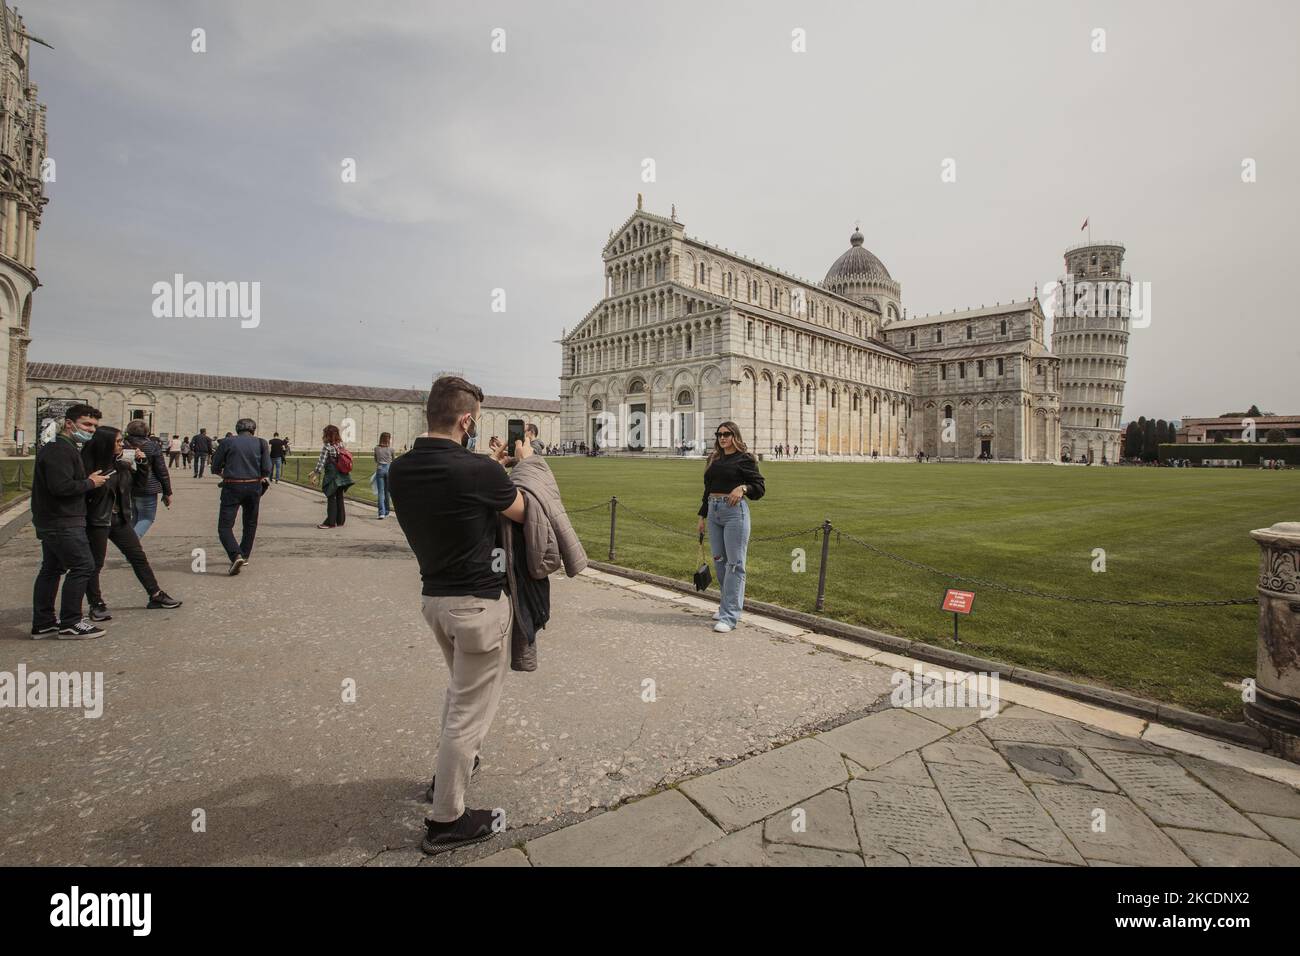 Tourists are back in the miracle square since the famous leaning tower has opened to the public, in Pisa, Italy, on May, 1st, 2021. After months of harsh lockdown, Italy has decided to open museums, arts buildings and theatres. (Photo by Enrico Mattia Del Punta/NurPhoto) Stock Photo